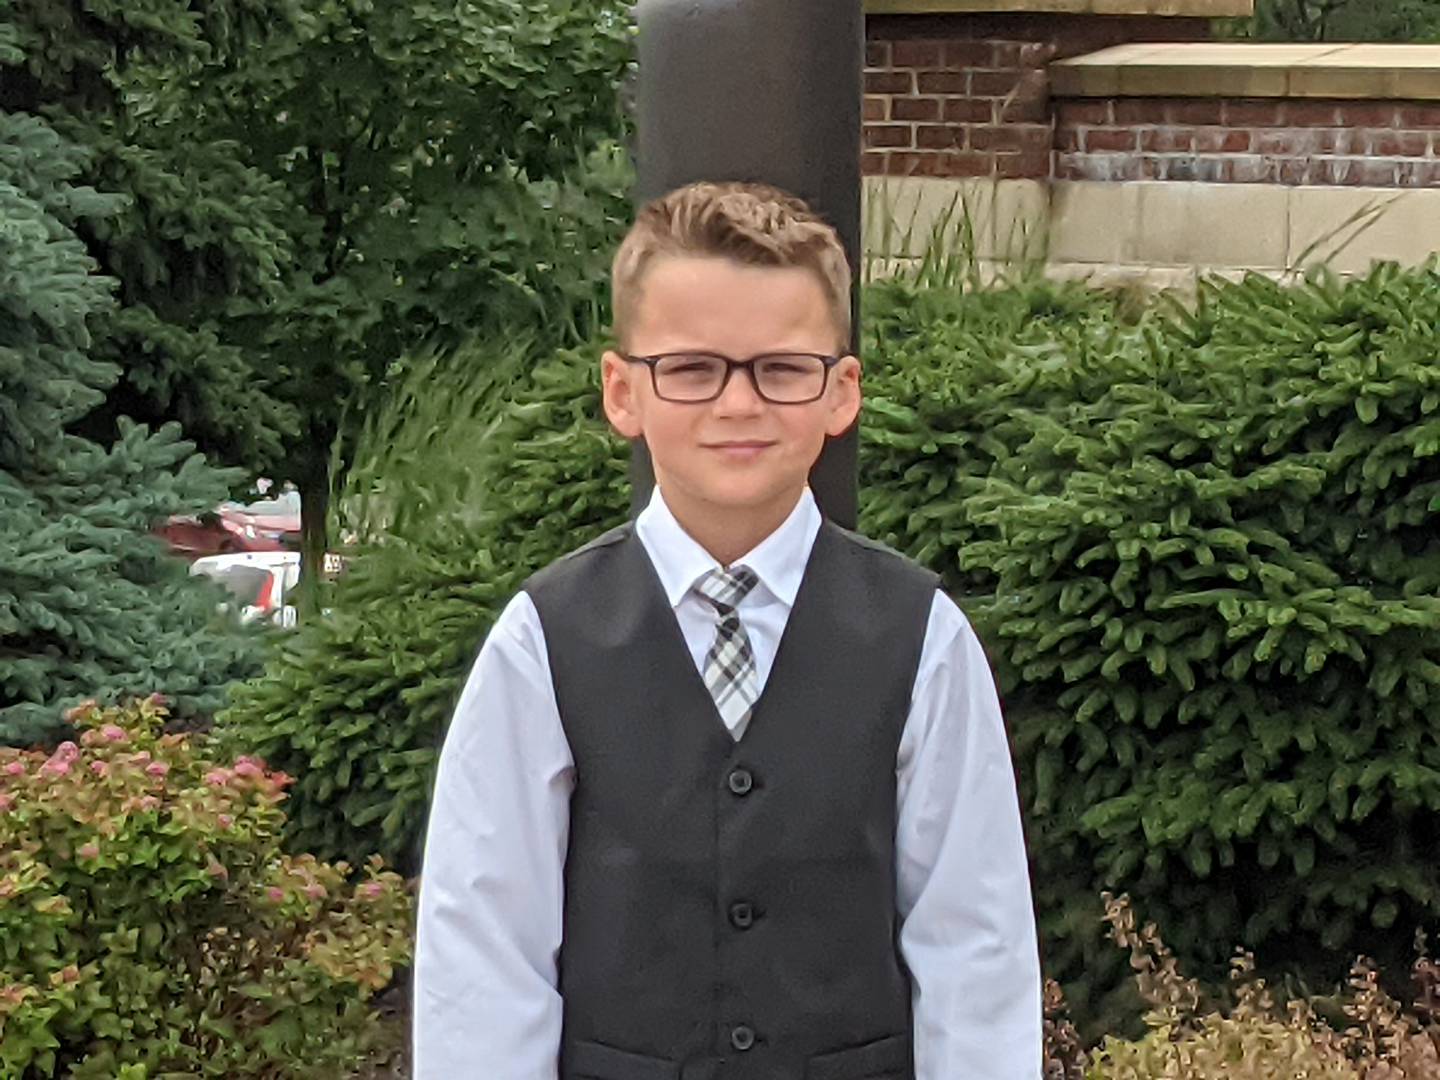 For the rest of August, Caden Stagl's flag will fly alongside the village’s current flag at the Oswego Village Hall. During the Aug. 8 Oswego Village Board meeting, Oswego Village President Ryan Kauffman proclaimed Caden’s flag as the honorary flag for the month.